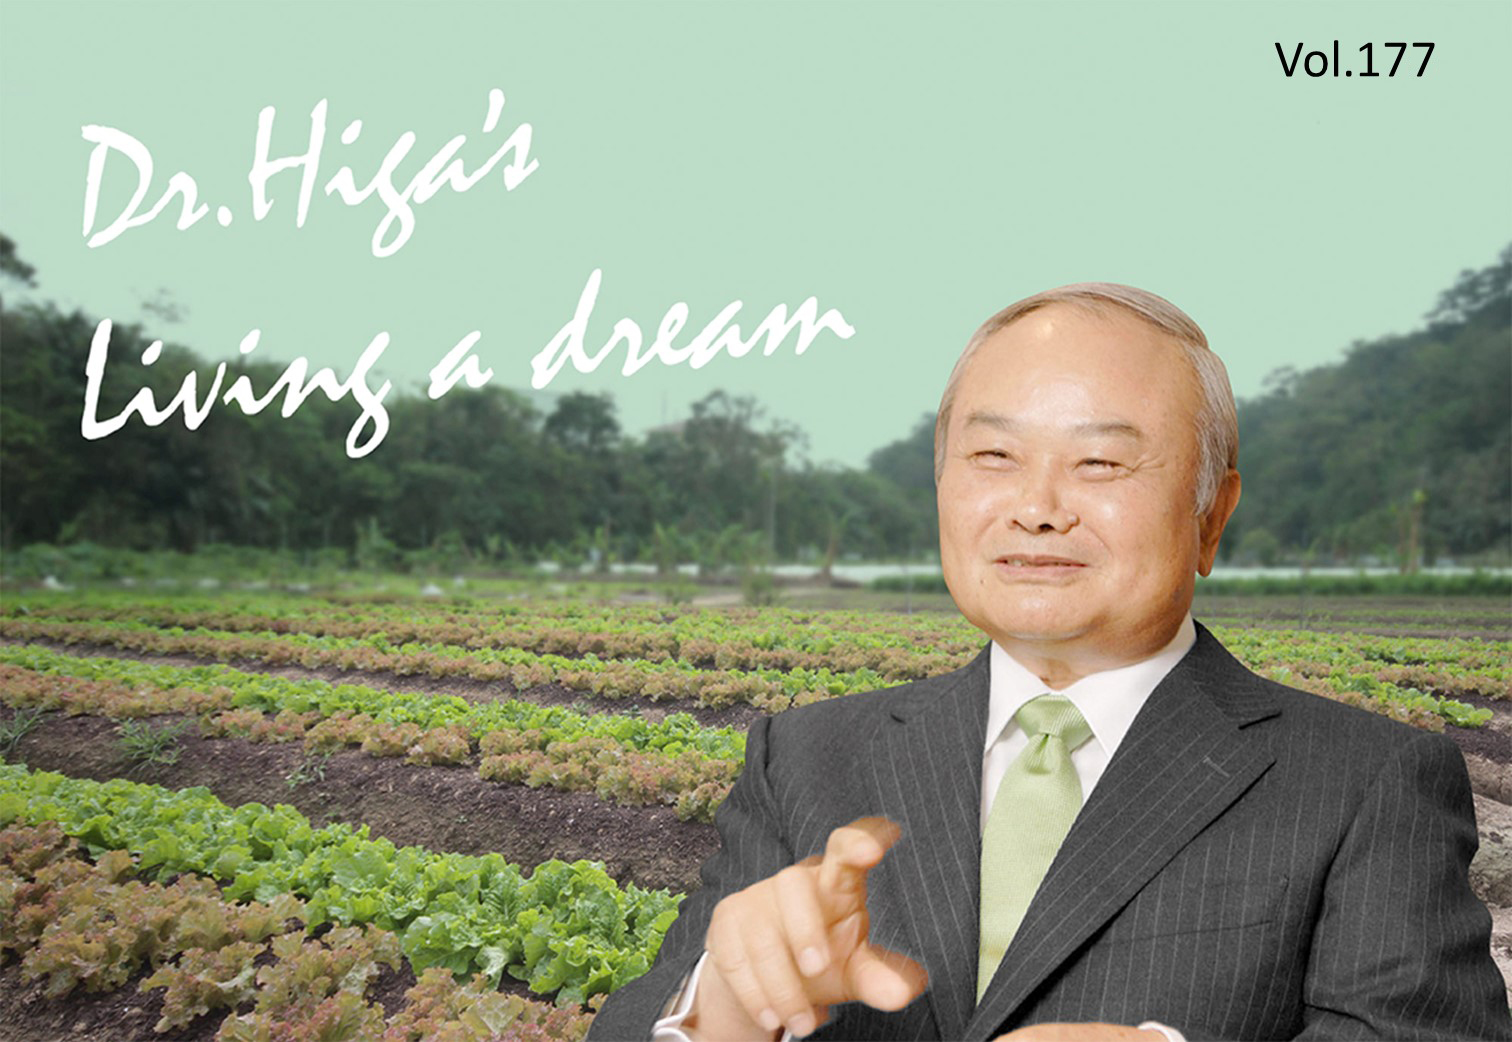 Dr. Higa's "Living a Dream": the latest article #177 is up!!!